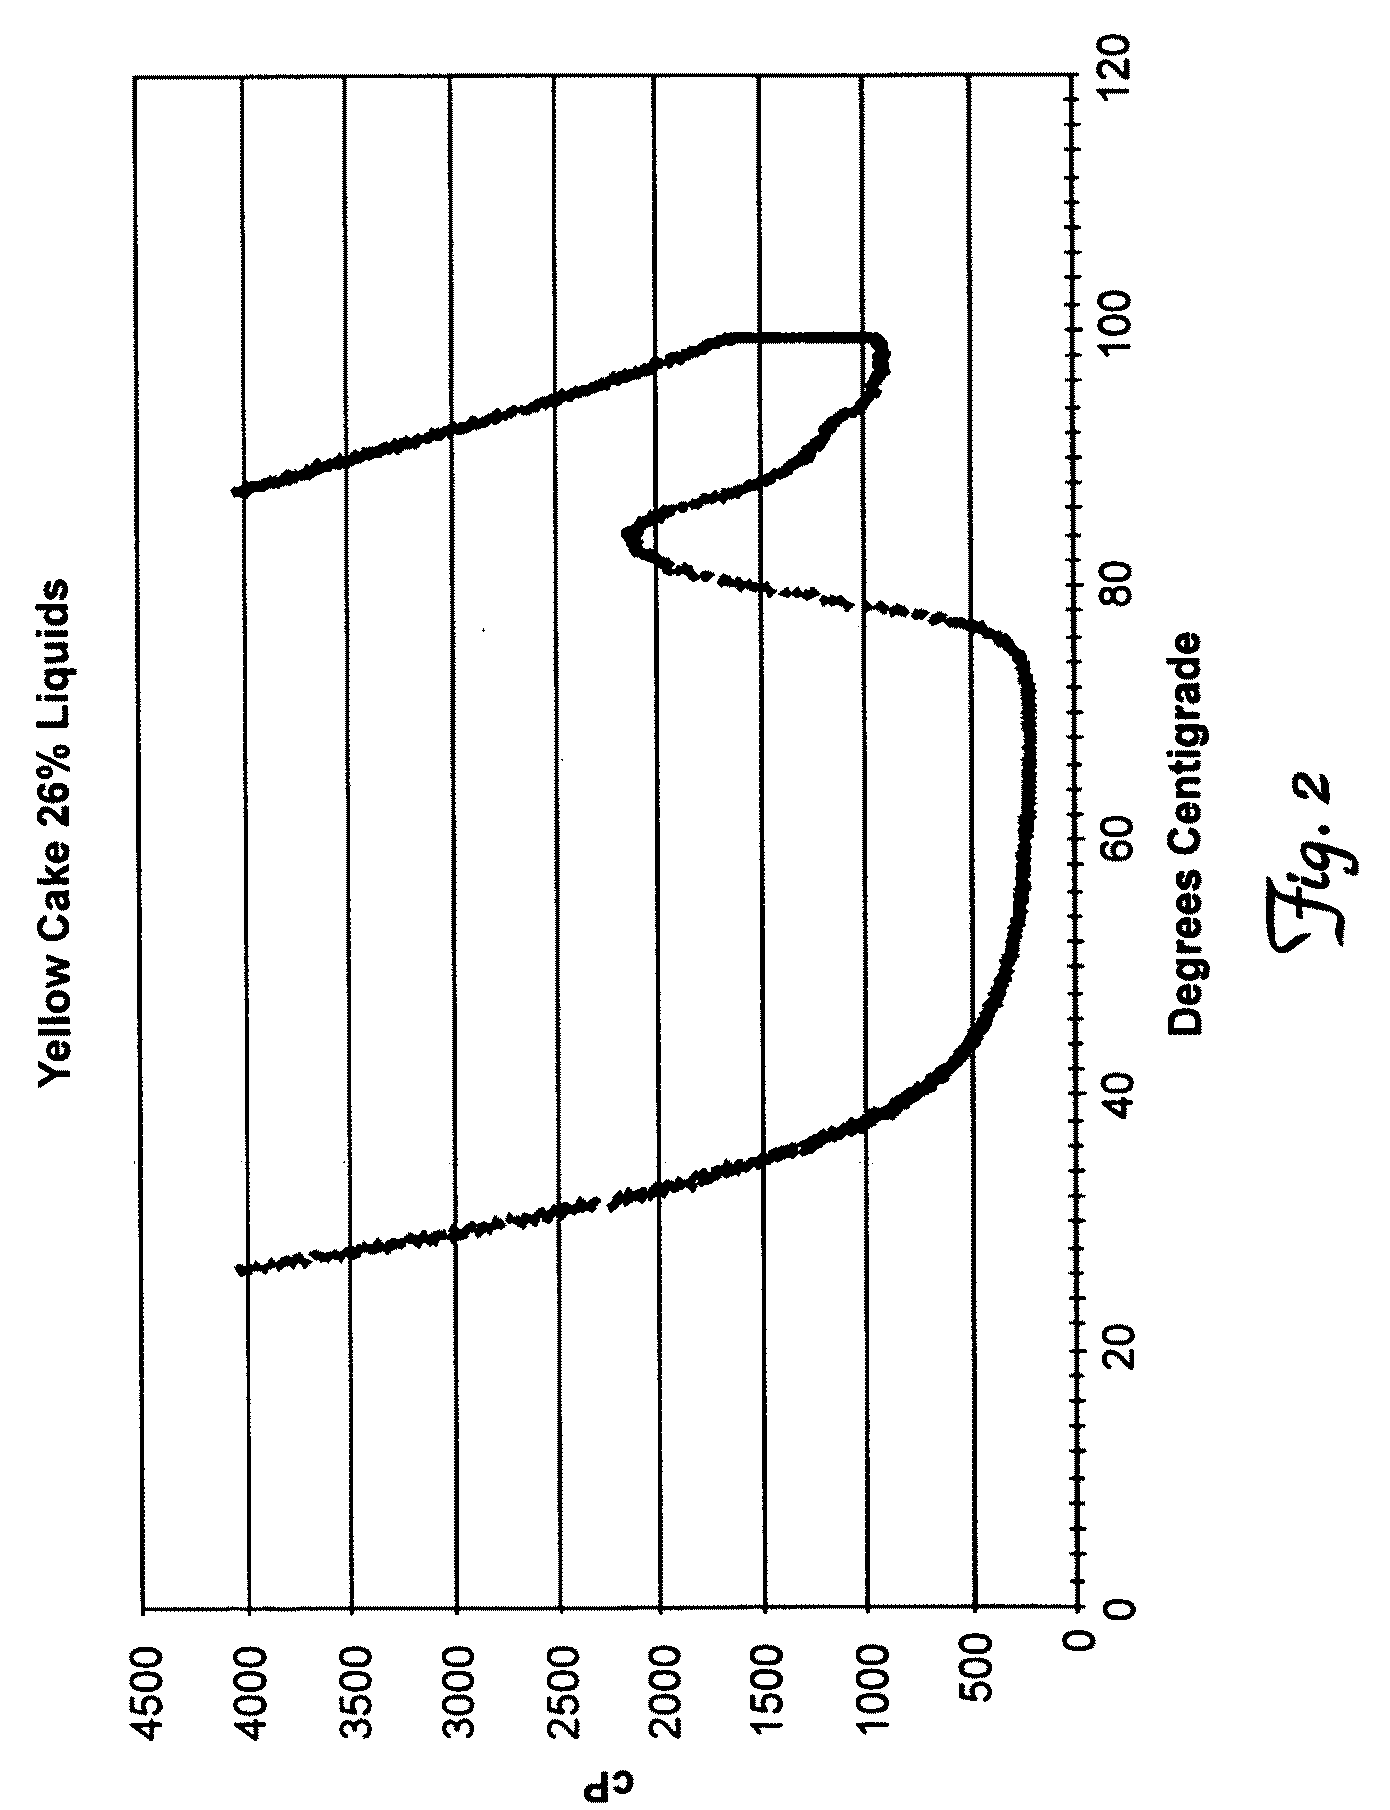 Gluten-free baked products and methods of preparation of same